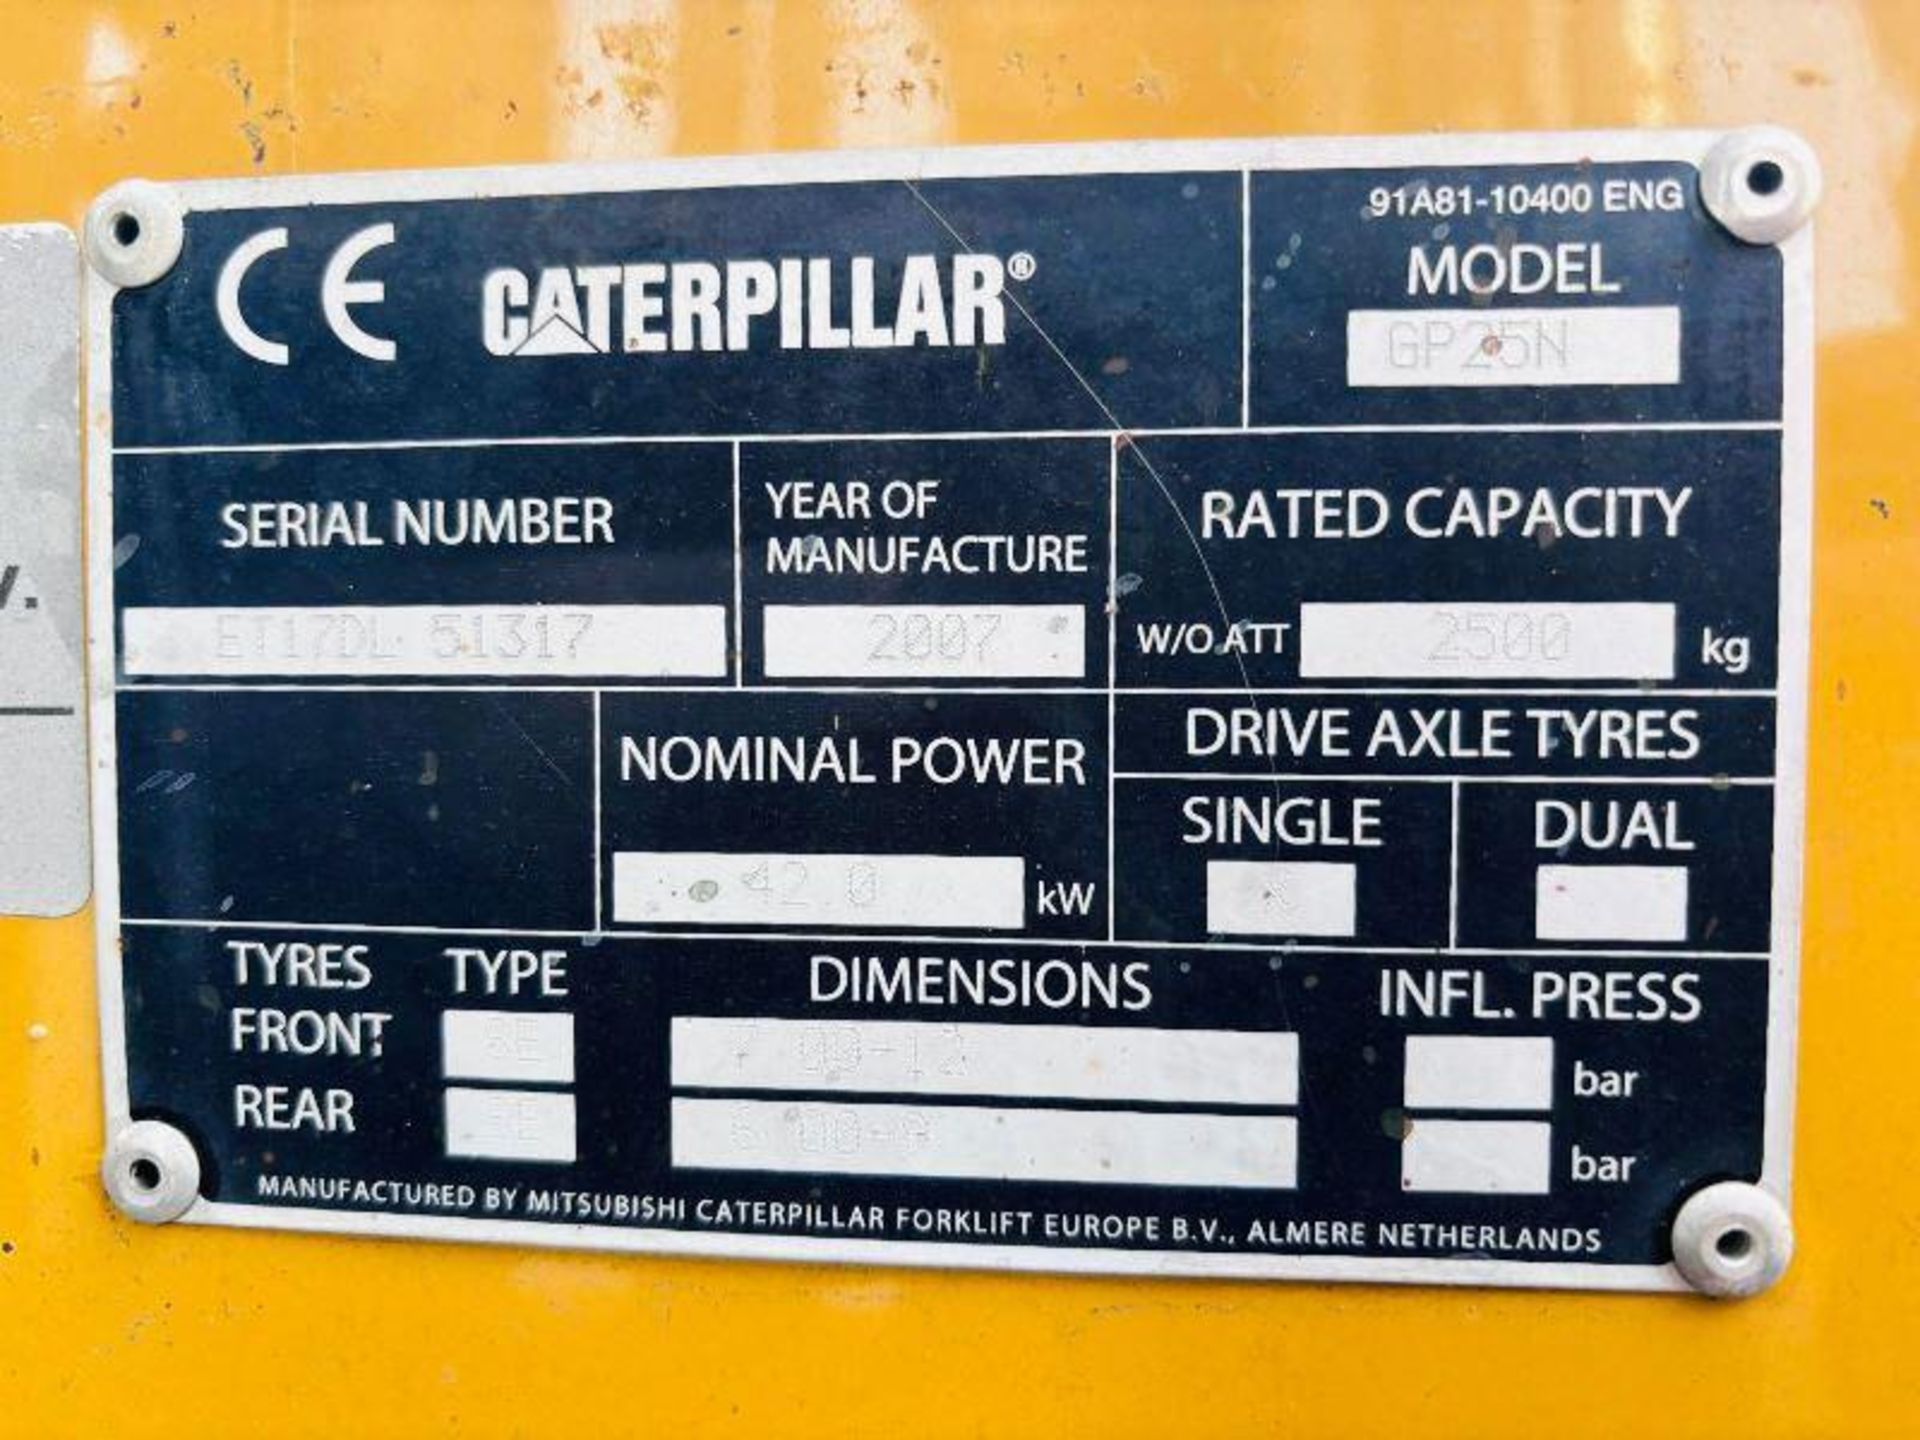 CATERPILLAR GR25N CONTAINER SPEC FORKLIFT C/W 3 STAGE MAST - Image 8 of 15